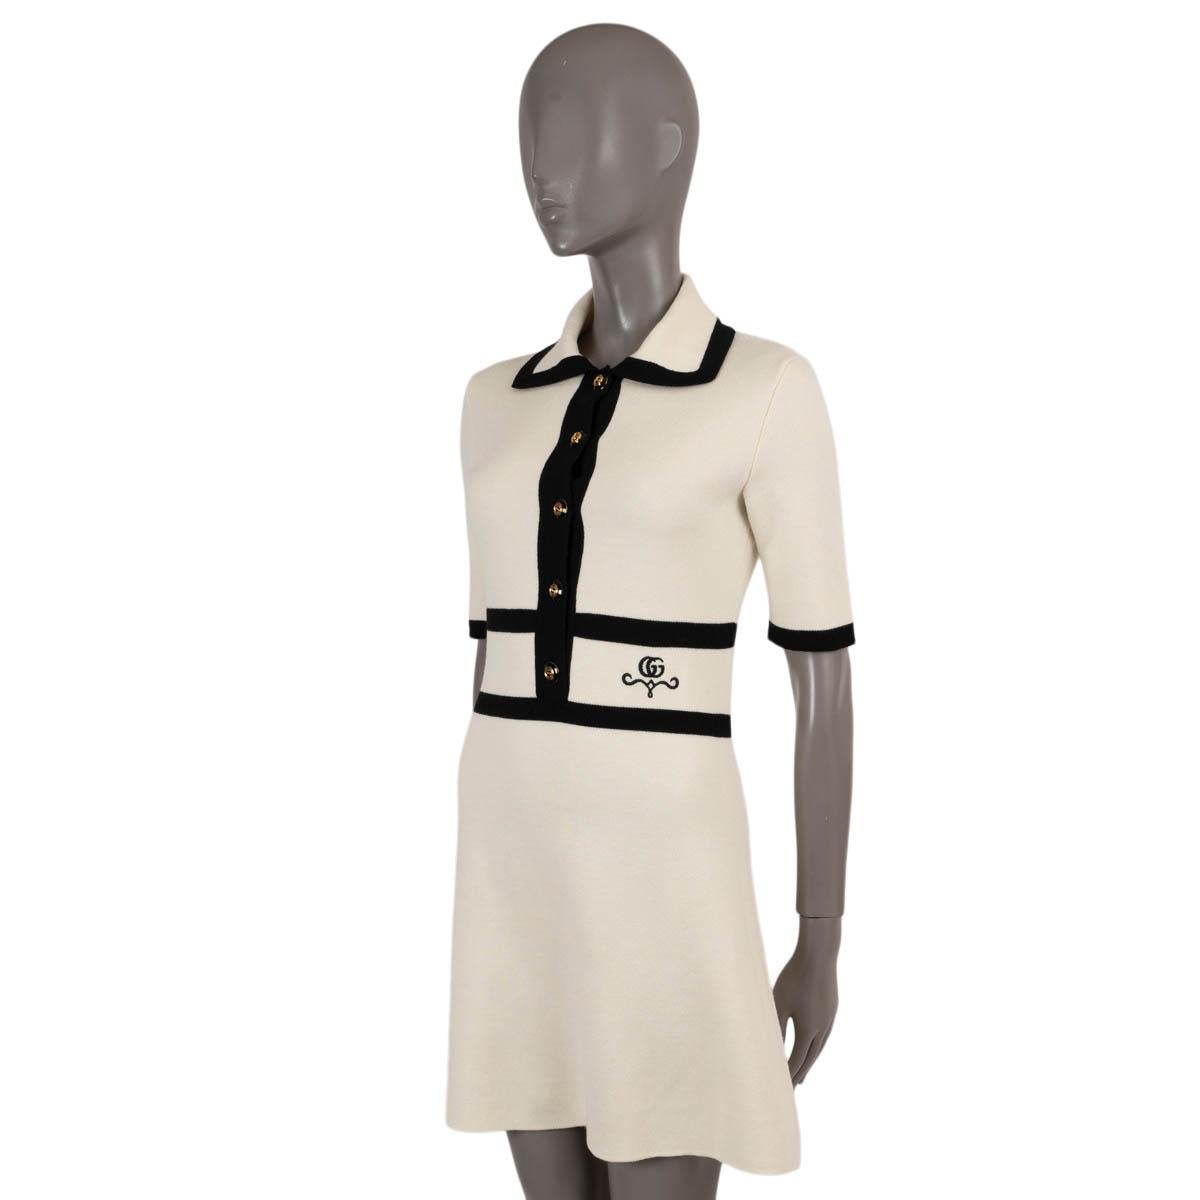 100% authentic Gucci GG piquet jacquard polo dress in cream wool (100% - please note the content tag is missing) with contrast black trim.  Features an A-line silhouette with short sleeves, polo collar and GG embroidered at the waist. Opens with